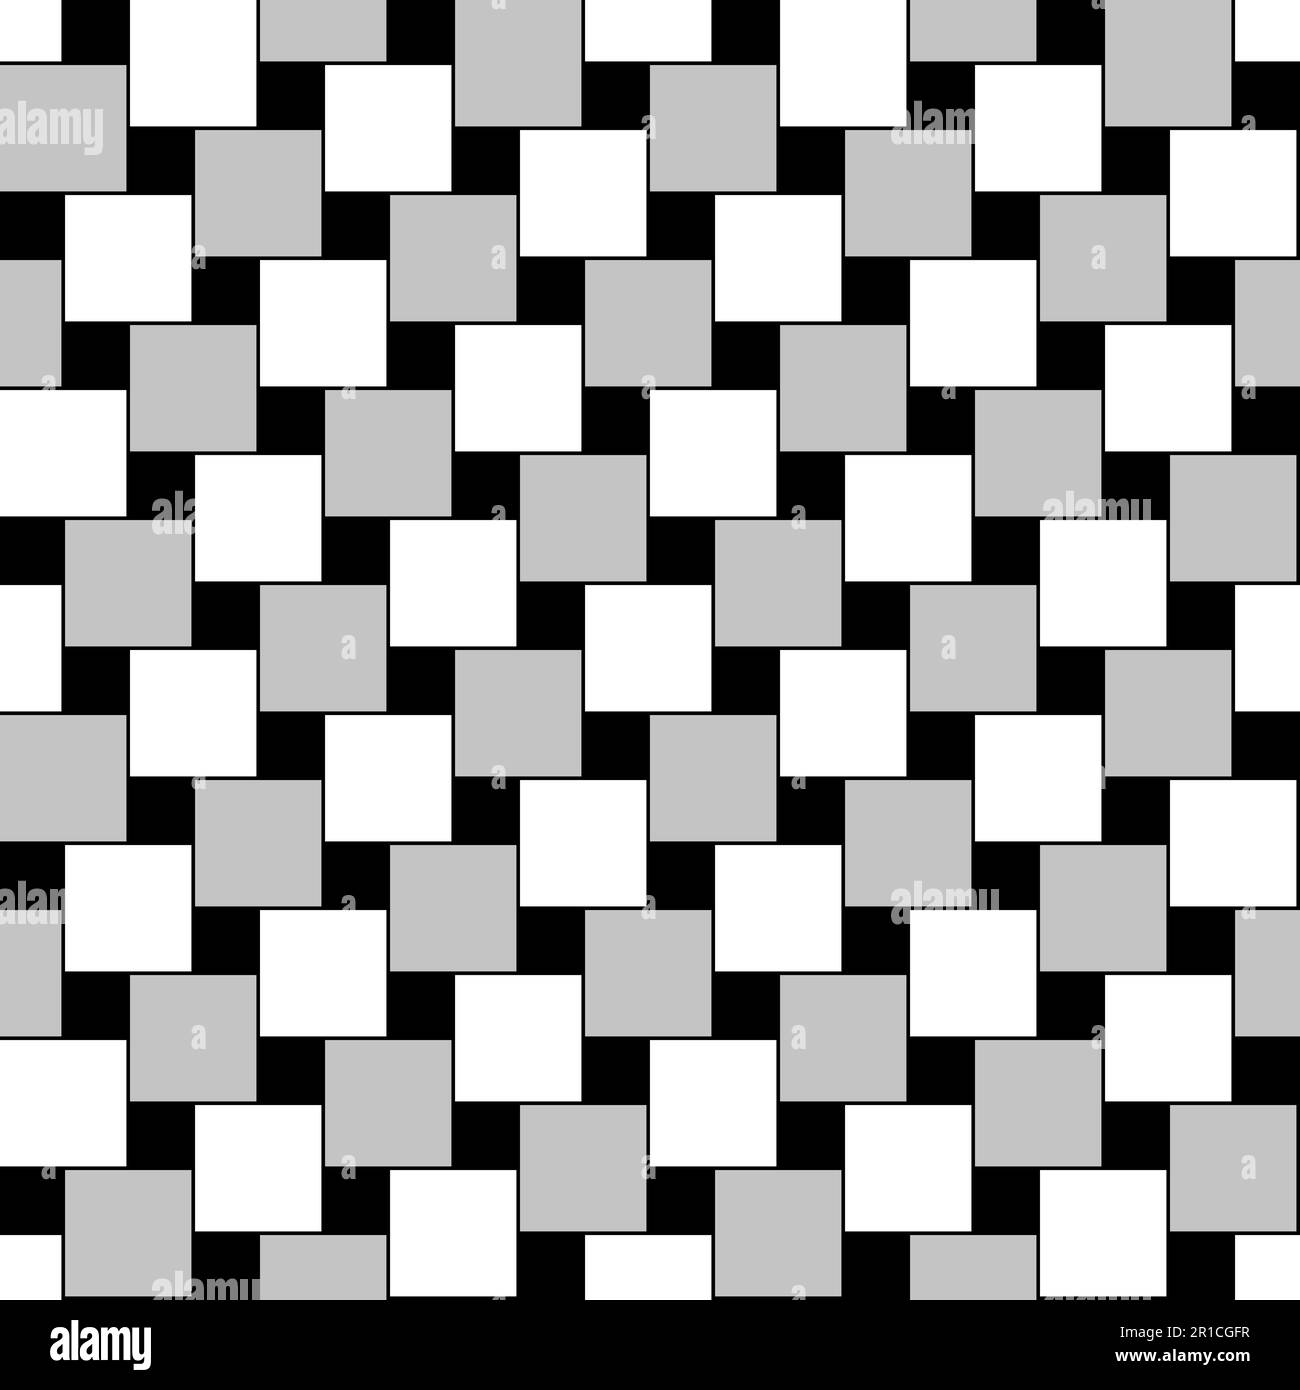 Square pattern, seamless tile, with geometrical-optical illusion. Special arranged squares, to appear no longer horizontally aligned, and twisted. Stock Photo